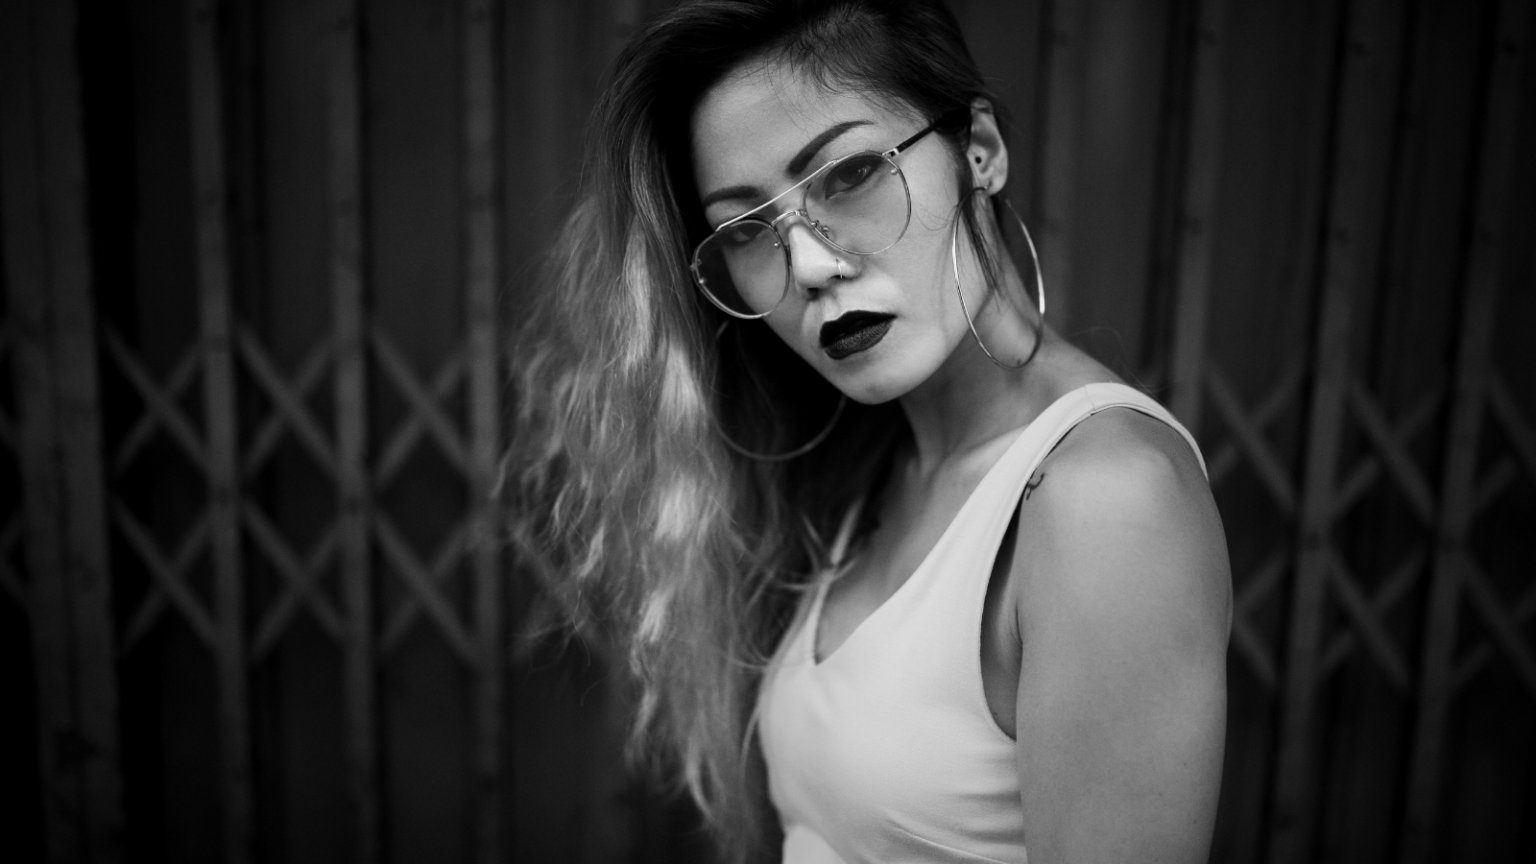 Photo of a feminine Asian person with black lipstick and glasses looking sternly at the camera